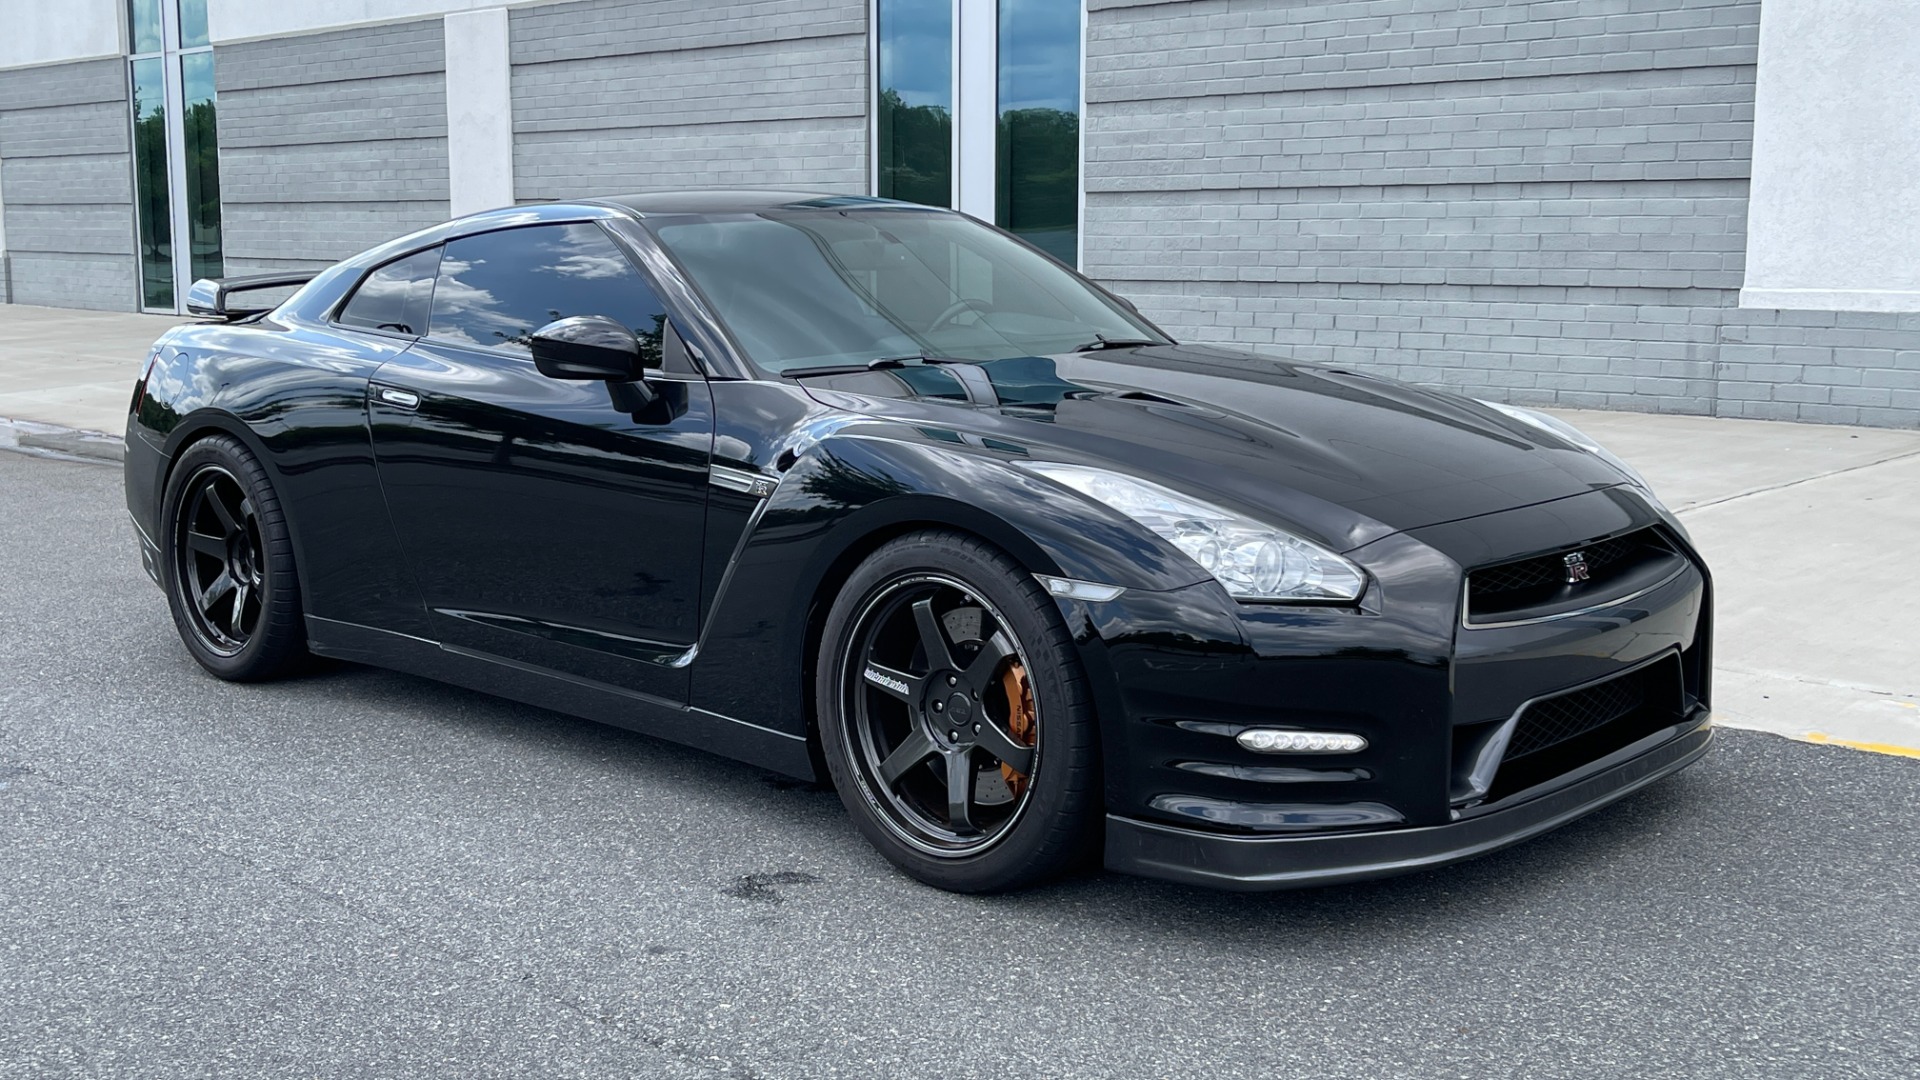 Used 2013 Nissan GT-R PREMIUM COUPE / 3.8L TWIN-TURBO / 6-SPD AUTO / COLD WTHR PKG / CAMERA for sale Sold at Formula Imports in Charlotte NC 28227 7